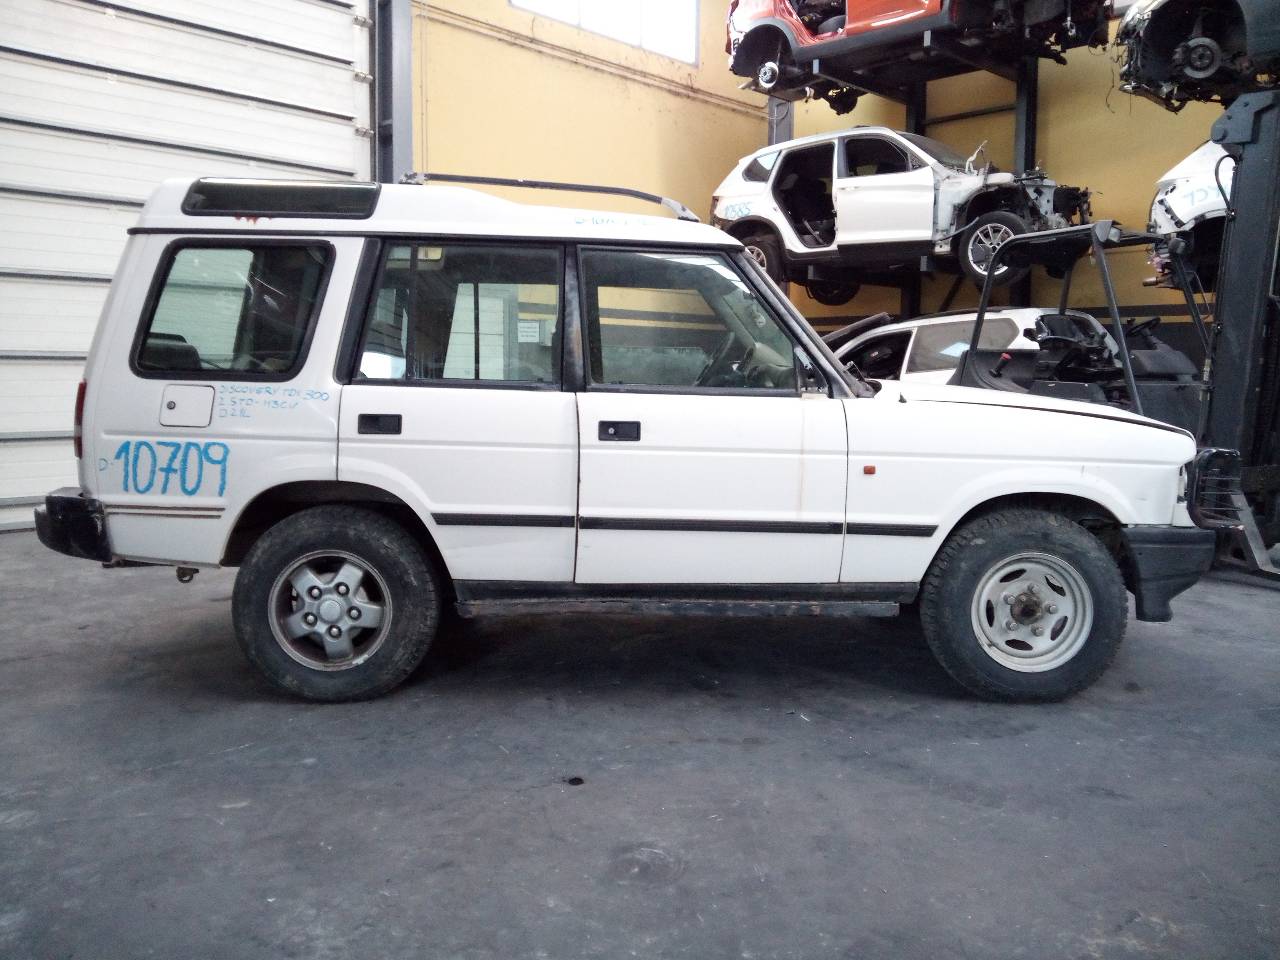 LAND ROVER Discovery 1 generation (1989-1997) Pohjaakselin etuosa P1-A6-13 20961454